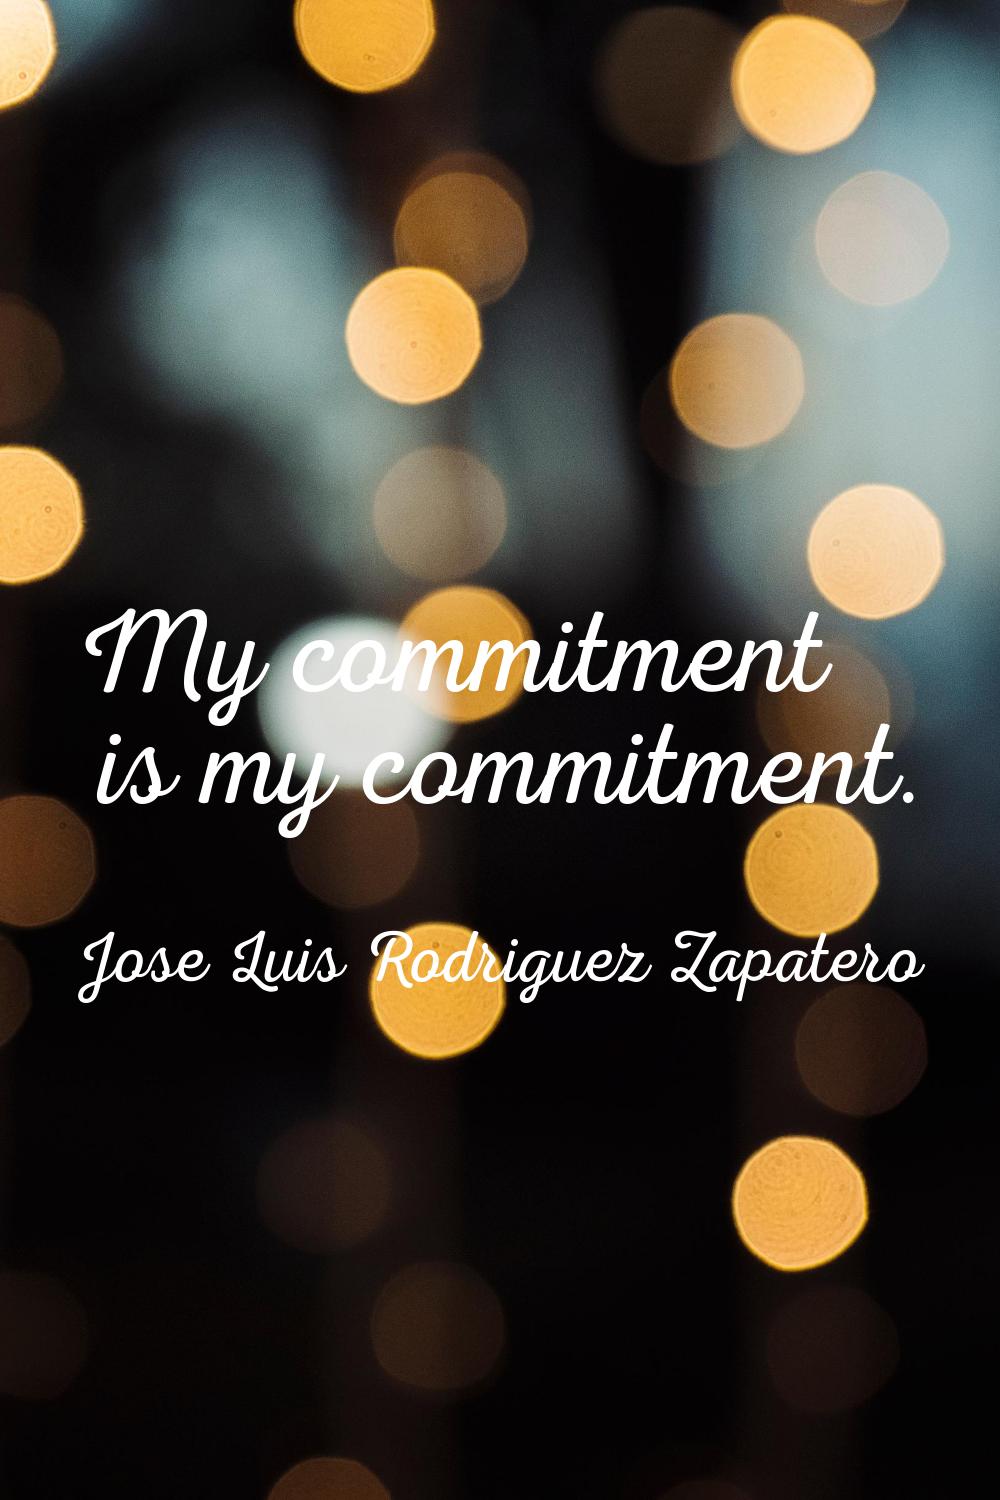 My commitment is my commitment.